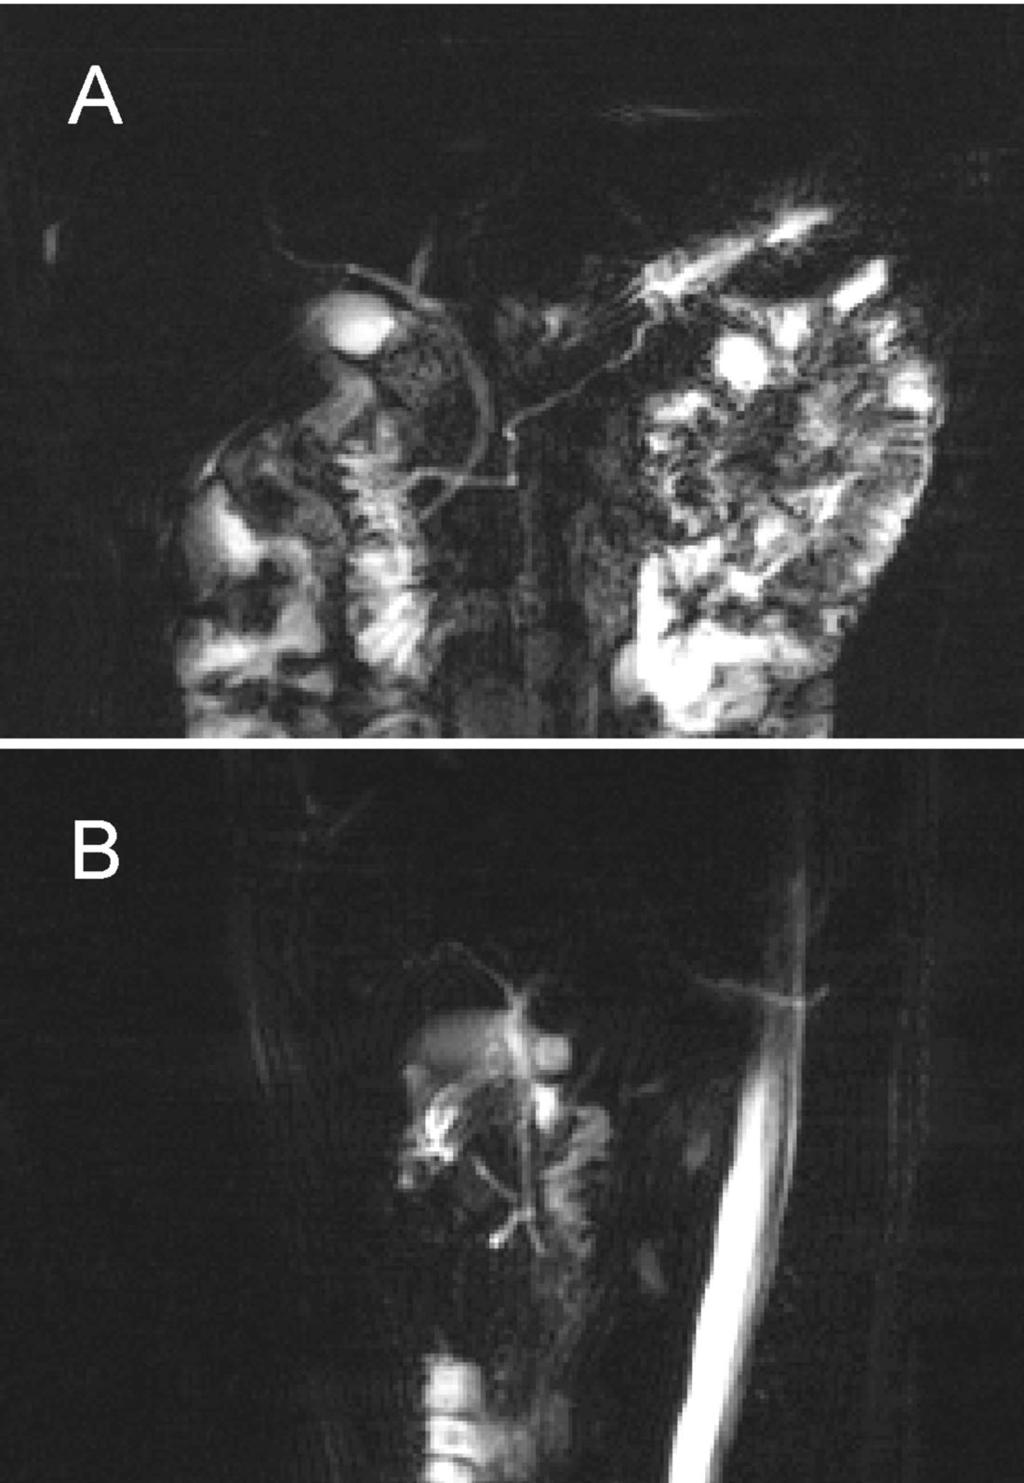 532 C. K. Sun, J. H. Chen, K. C. Yang, and C. C. Wu papilla (dorsal duct). The clinical relevance of remains controversial.